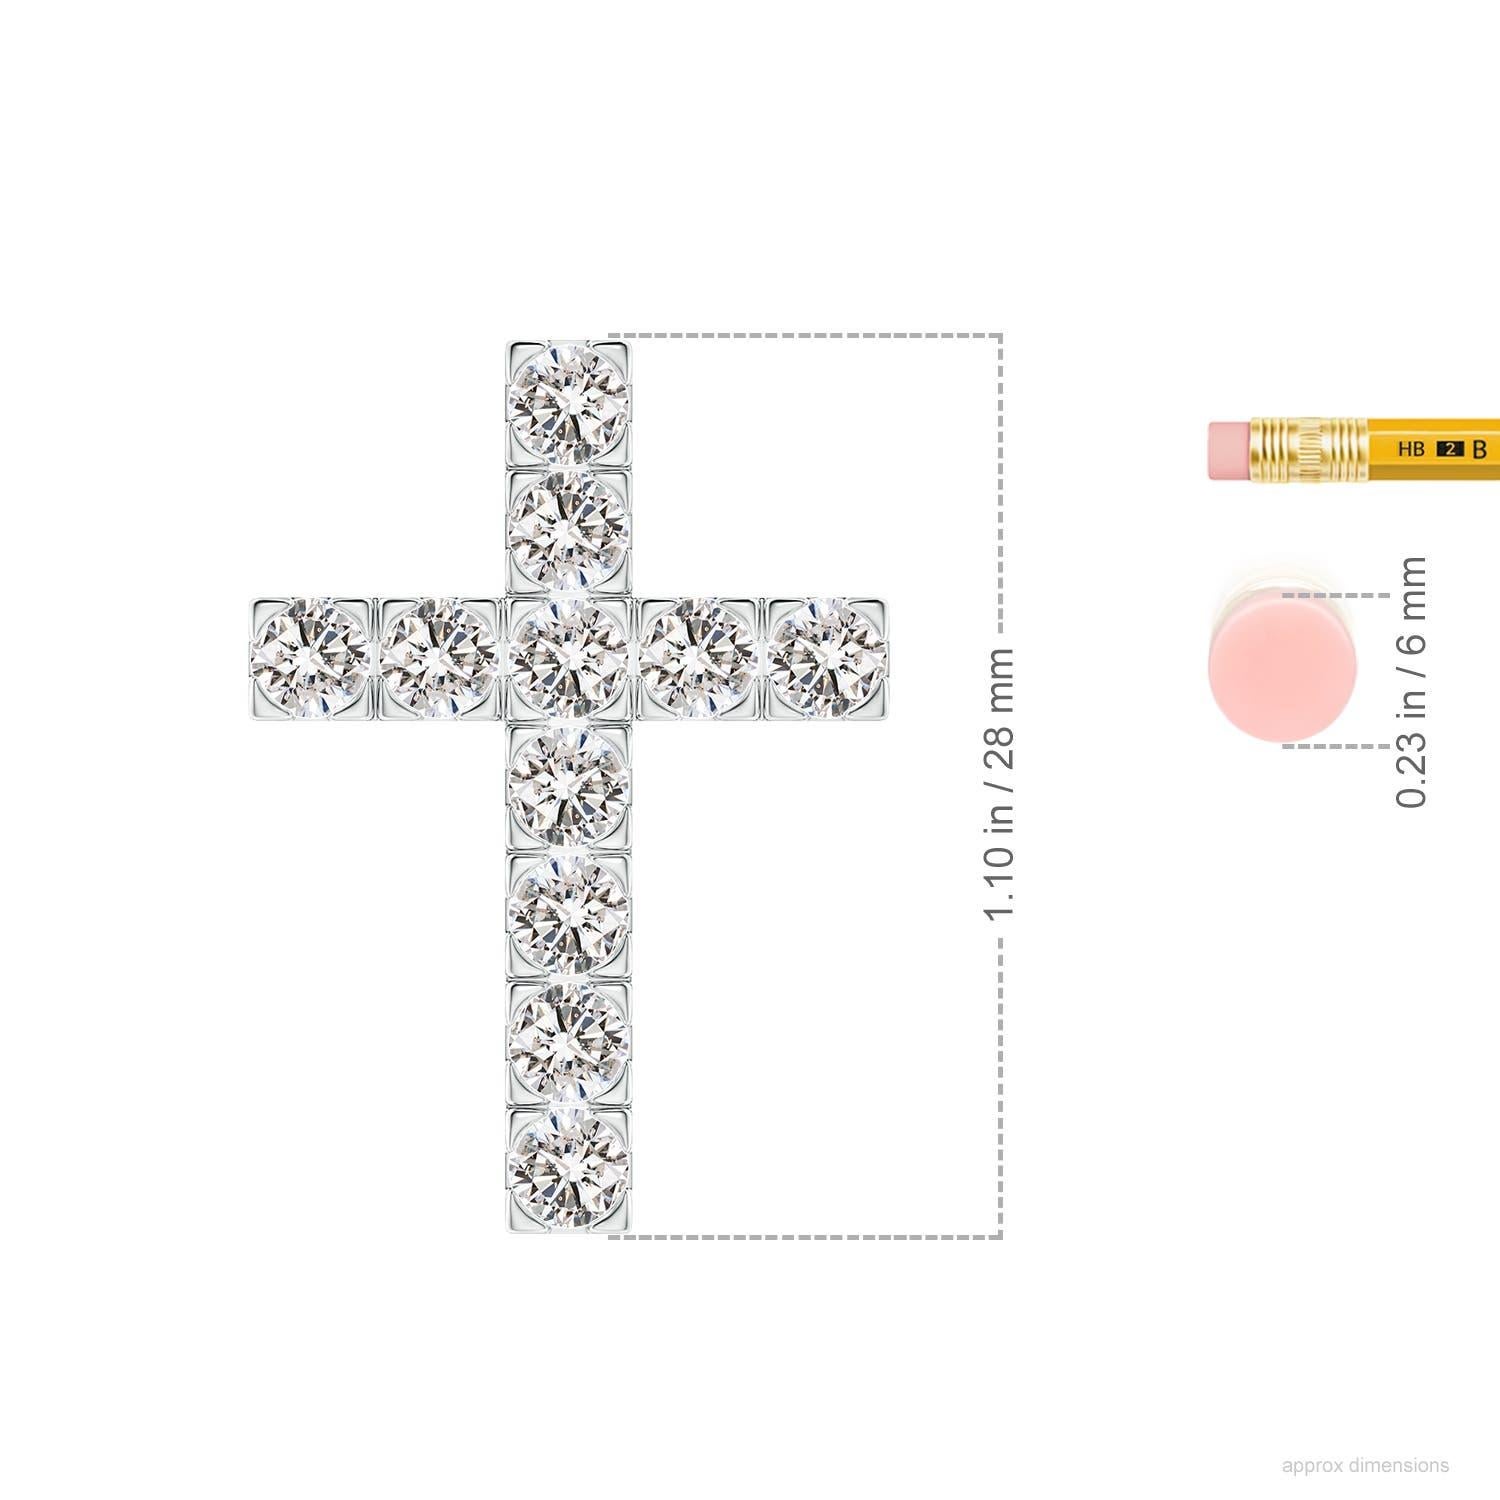 This platinum cross pendant is a traditional symbol of faith and belief. The brilliant diamonds held in flat prong settings, square off the edges for a sophisticated look.
Diamond is the Birthstone for April and traditional gift for 10th wedding